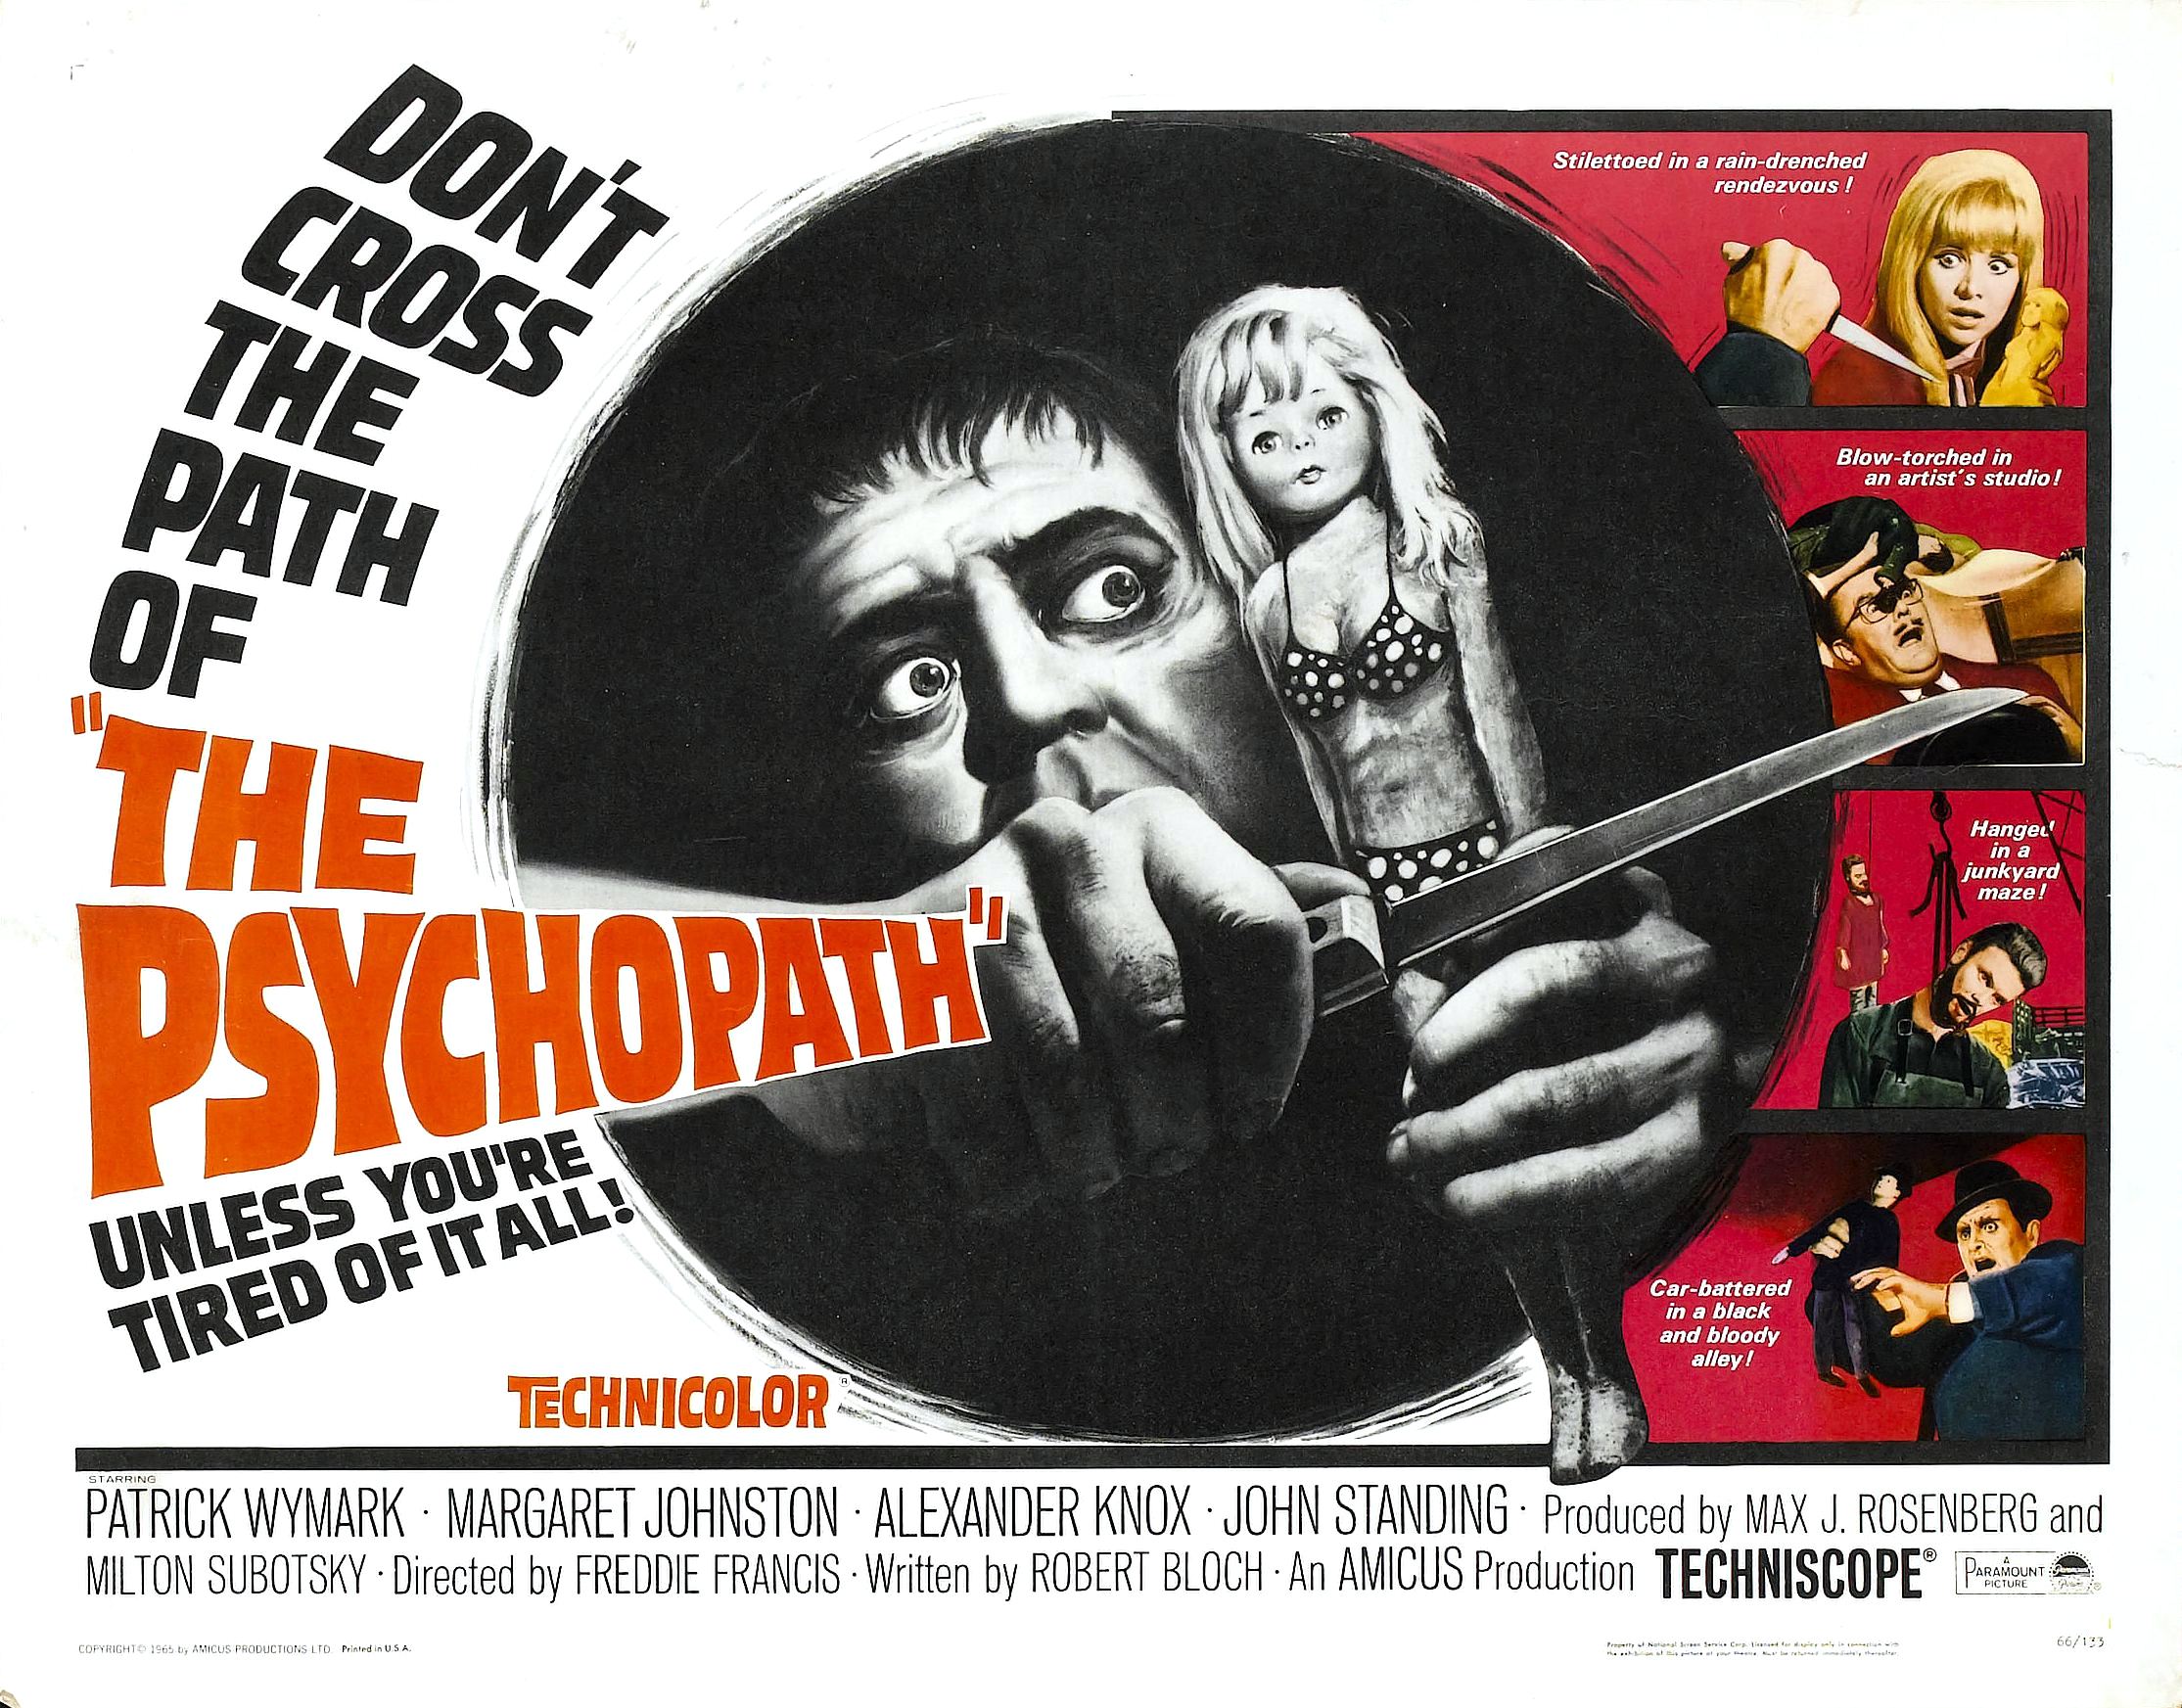 psychopath 1966 poster - Don'T Cross The Board Path Of The Psychopatrs Unless You'Re Tired Of It All! Card Technicolor Patrick Wymark Margaret Johnston Alexander Knox John Standing Produced by Max J. Rosenberg and Milton Subotsky. Directed by Freddie Fran